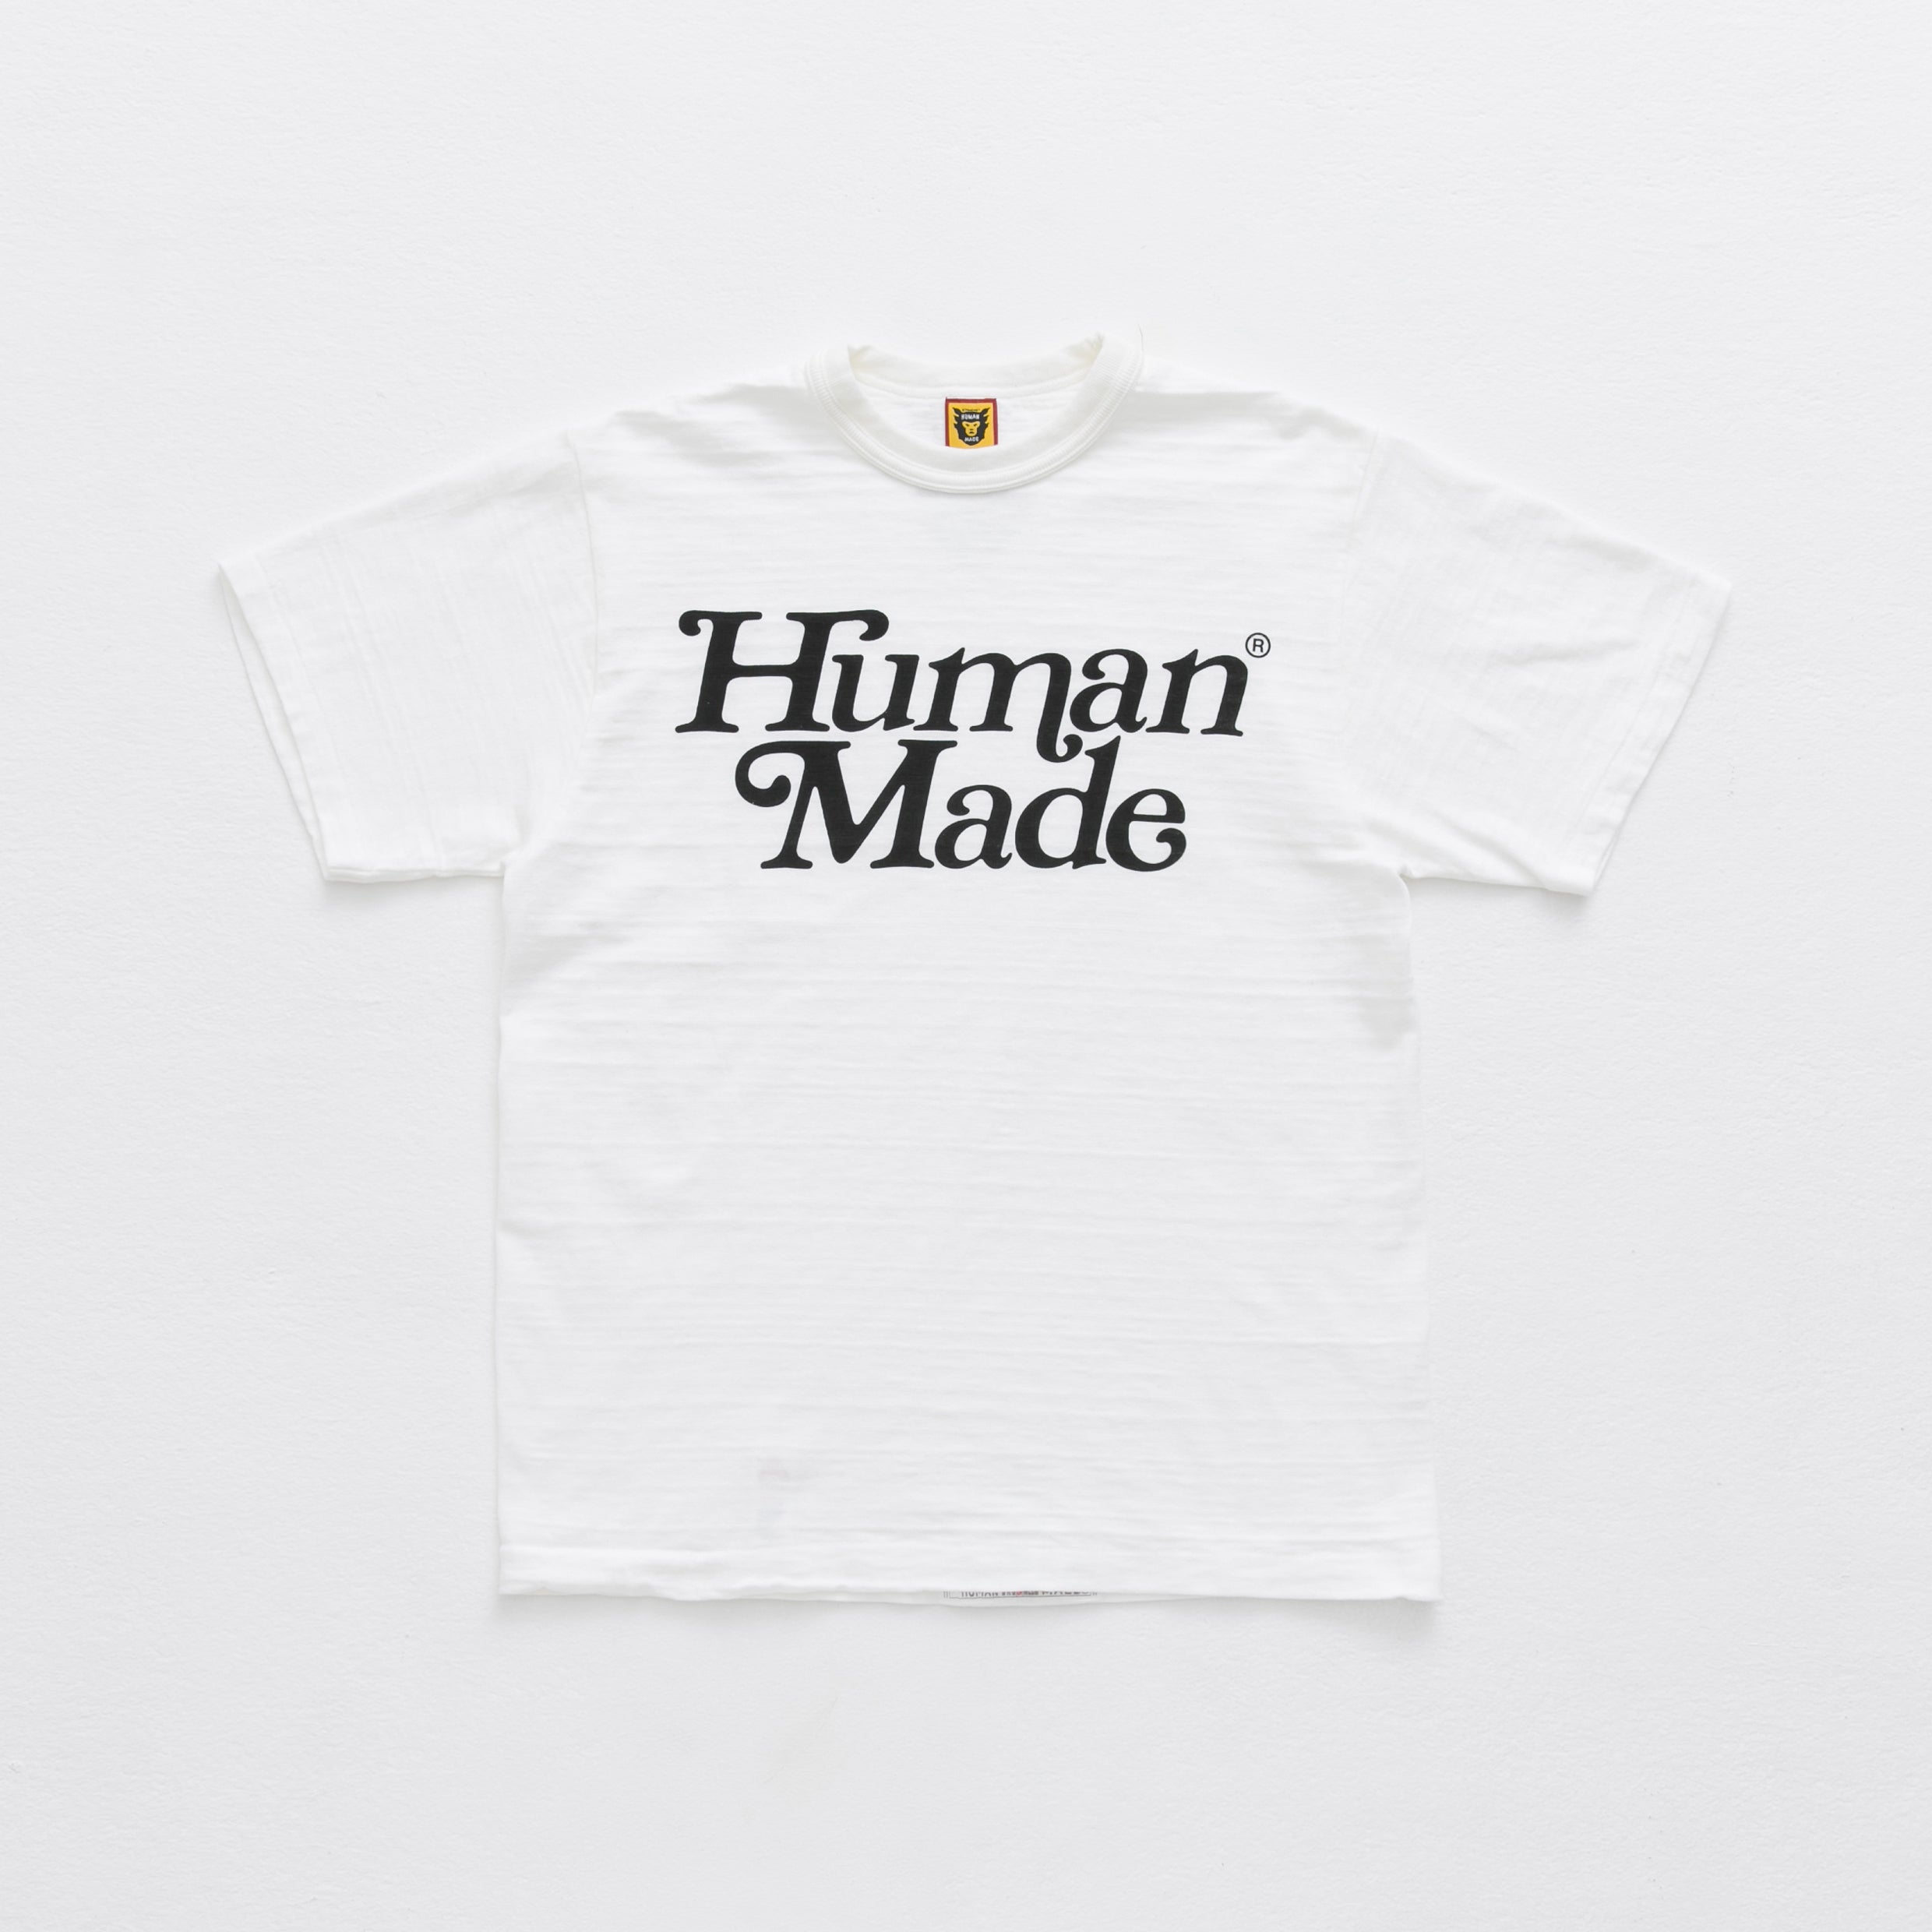 Tシャツ/カットソー(半袖/袖なし)三連休特価！！humanmade girls don't cry京都限定T